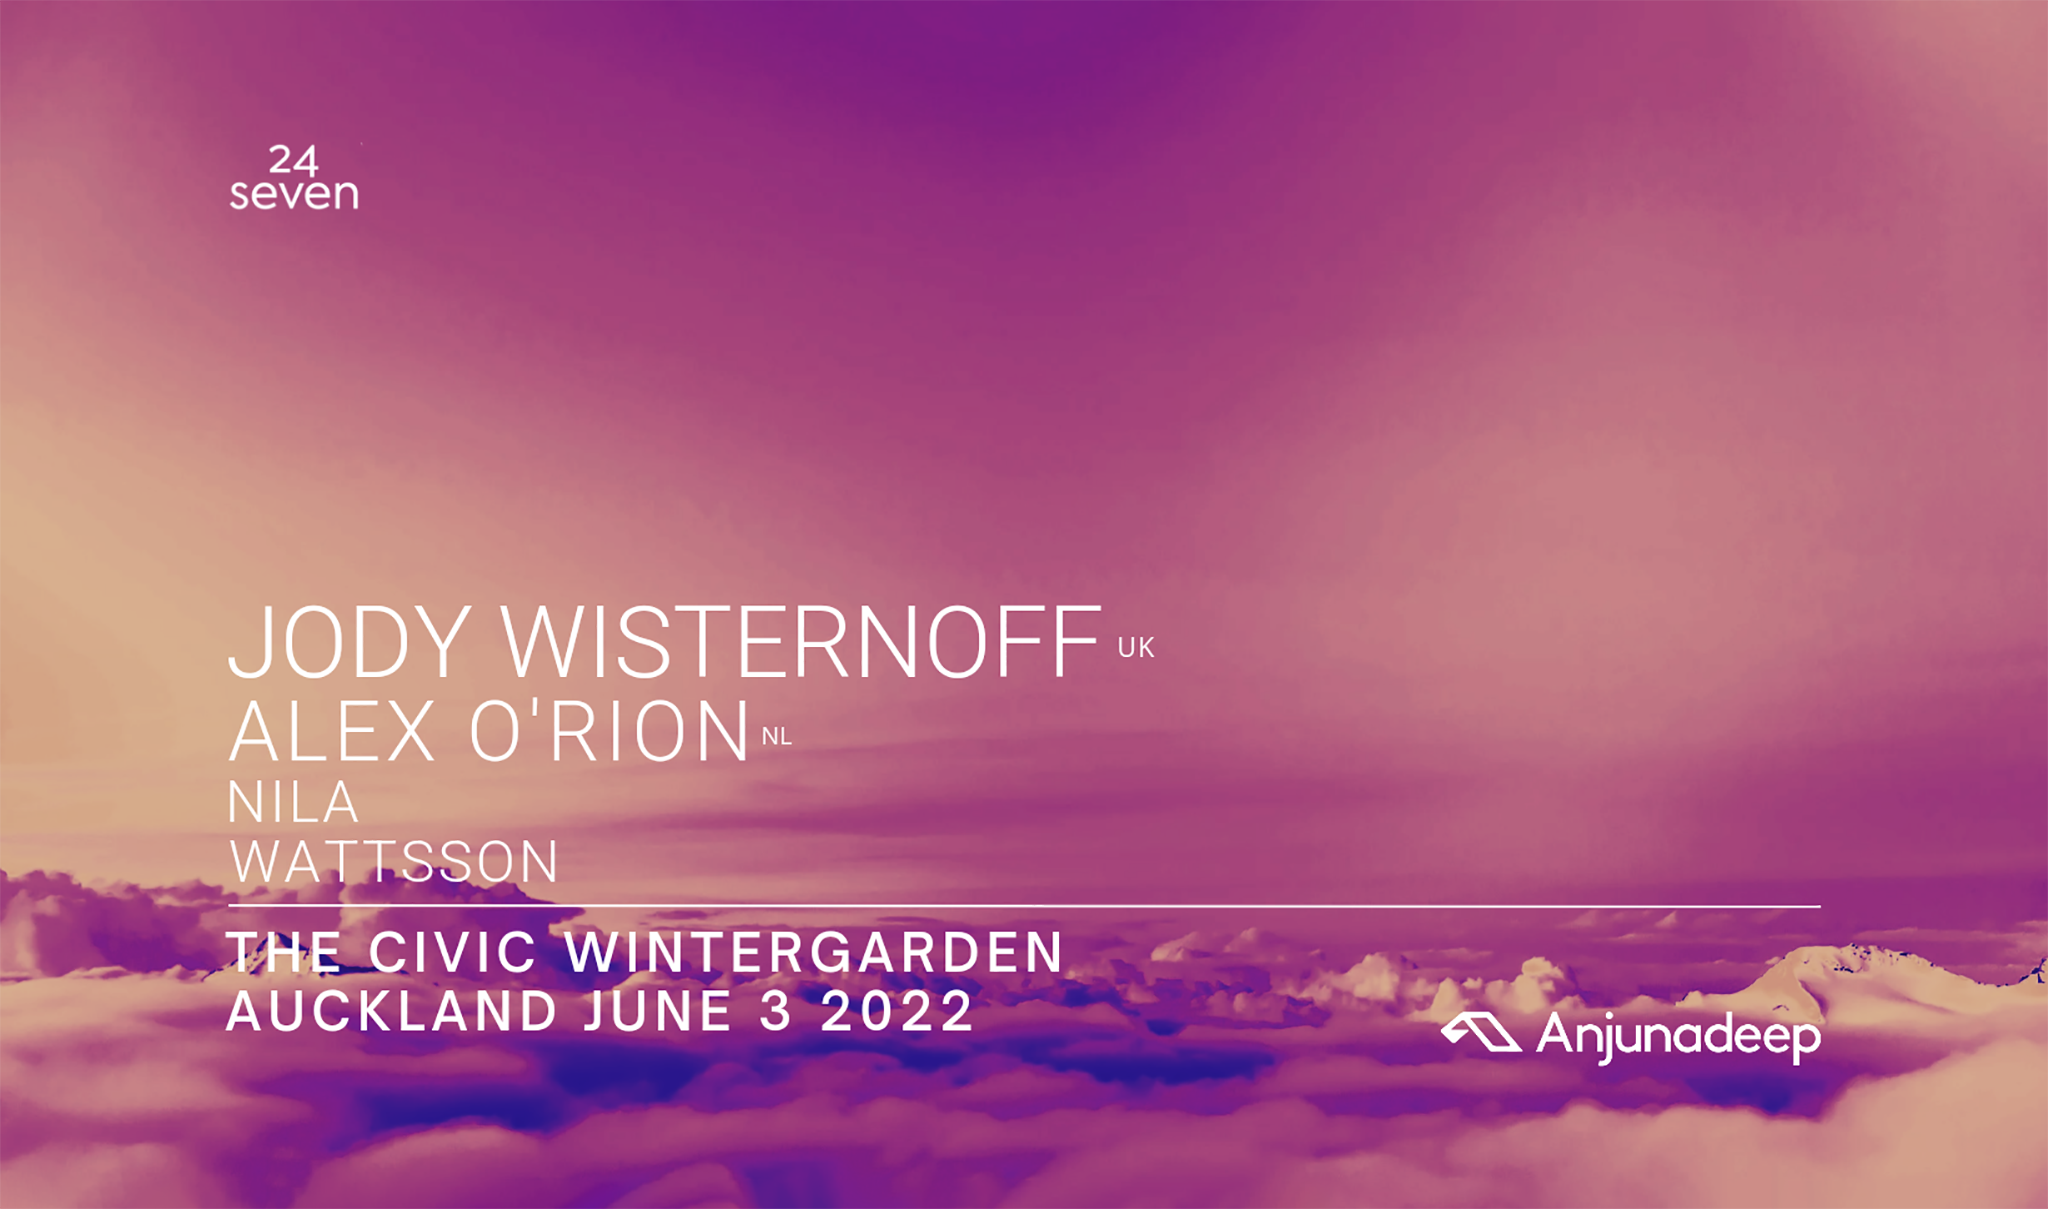 Image used with permission from Ticketmaster | Jody Wisternoff - Anjunadeep & Alex ORion tickets